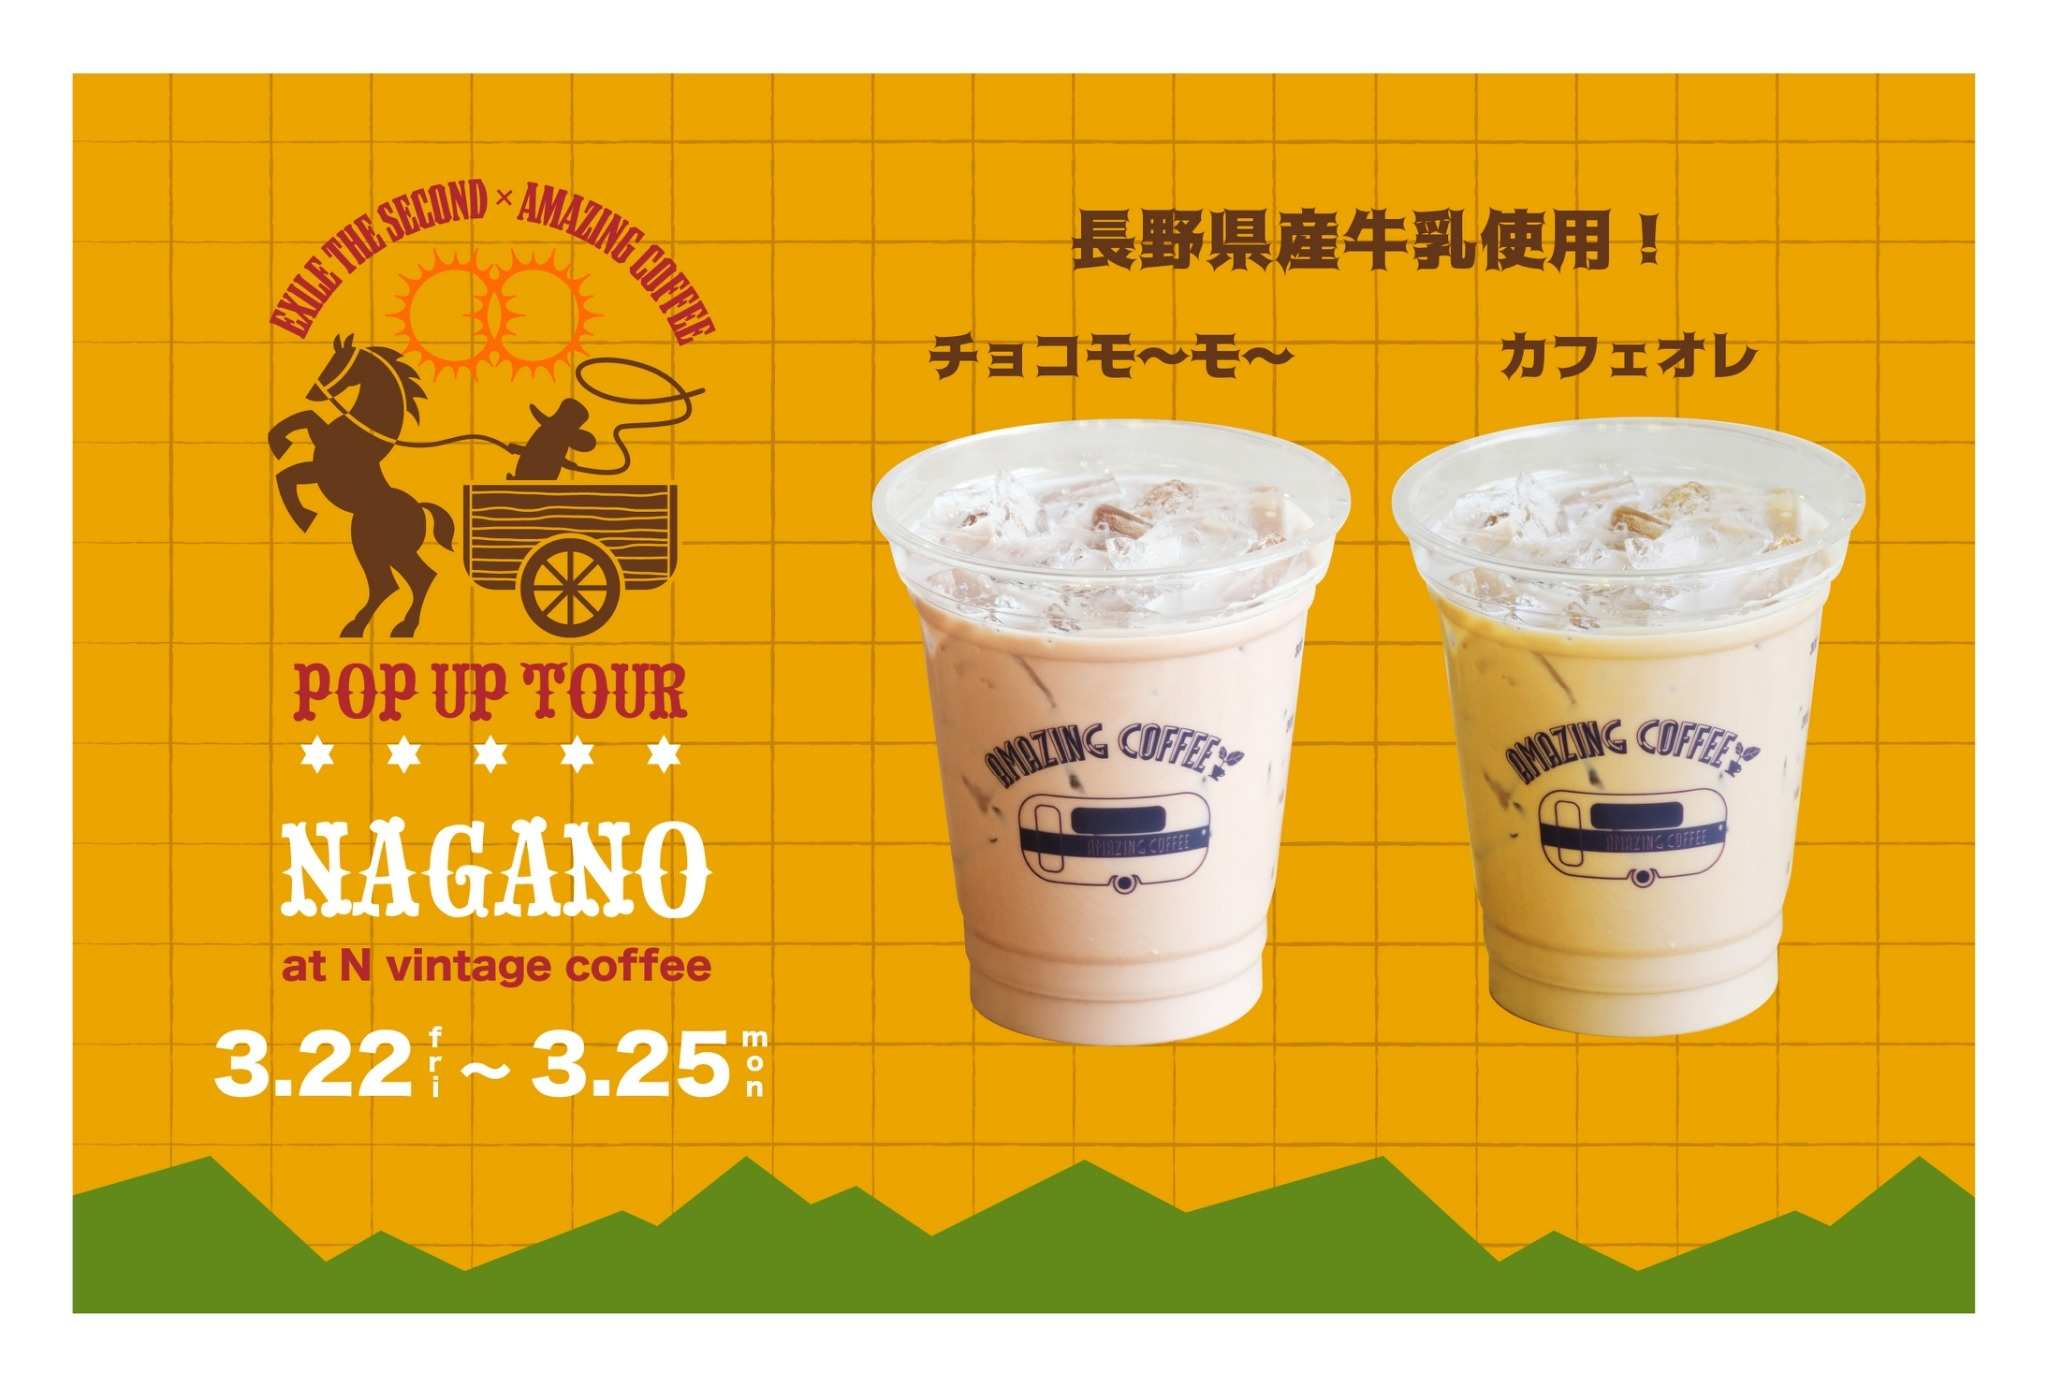 『EXILE THE SECOND × AMAZING COFFEE POP UP TOUR』in 長野 3月22日(金)〜3月25日(月) N vintage coffeeにて開催！